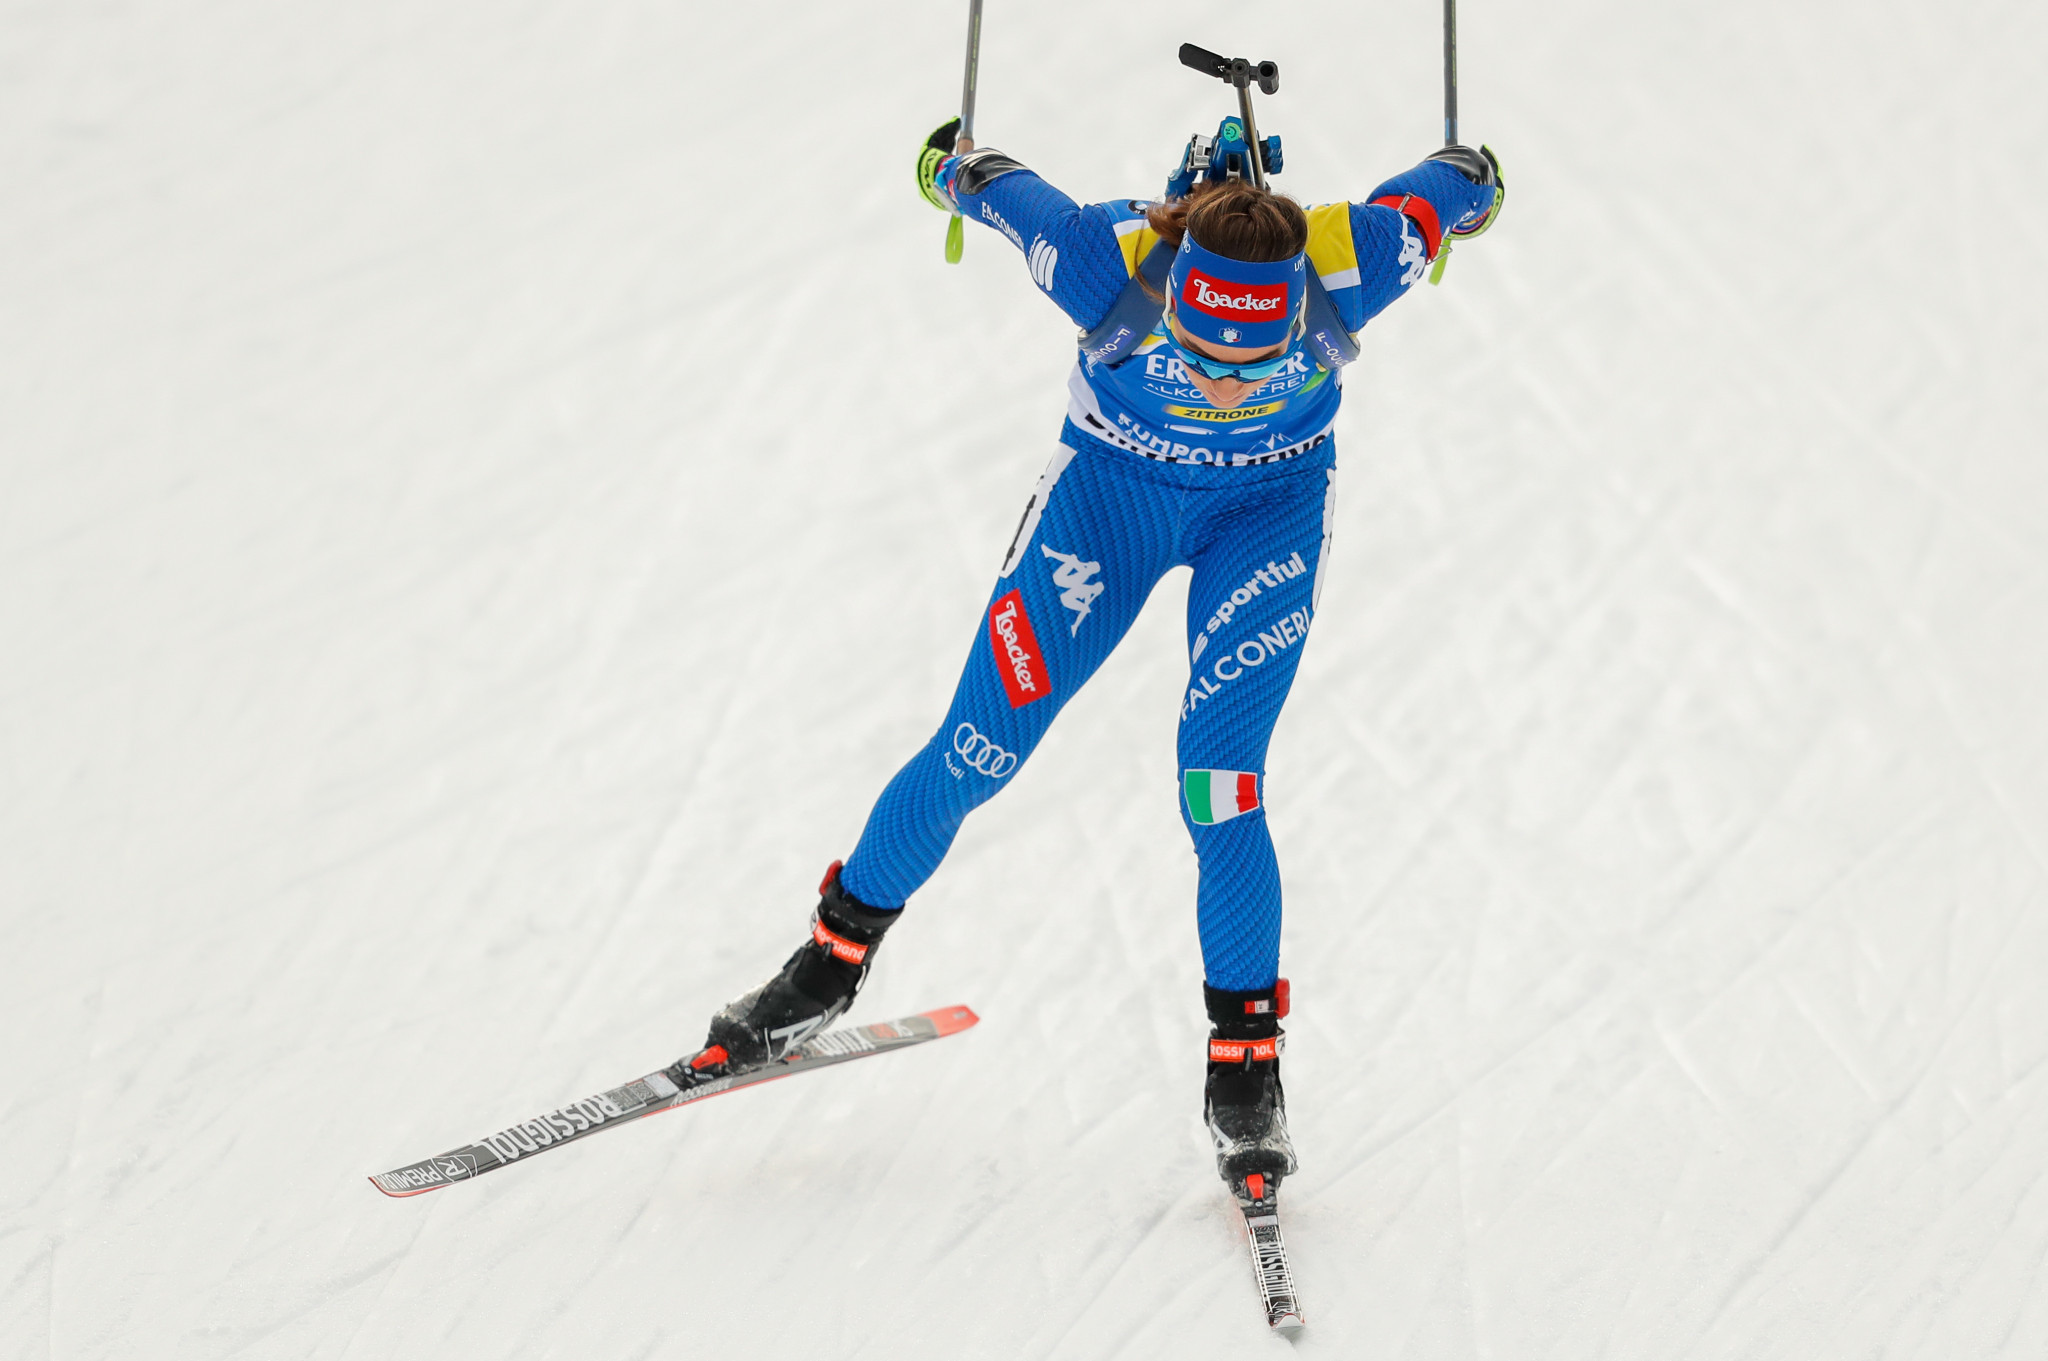 Italy's Dorothea Wierer secured her first win of the season in Ruhpolding ©Getty Images